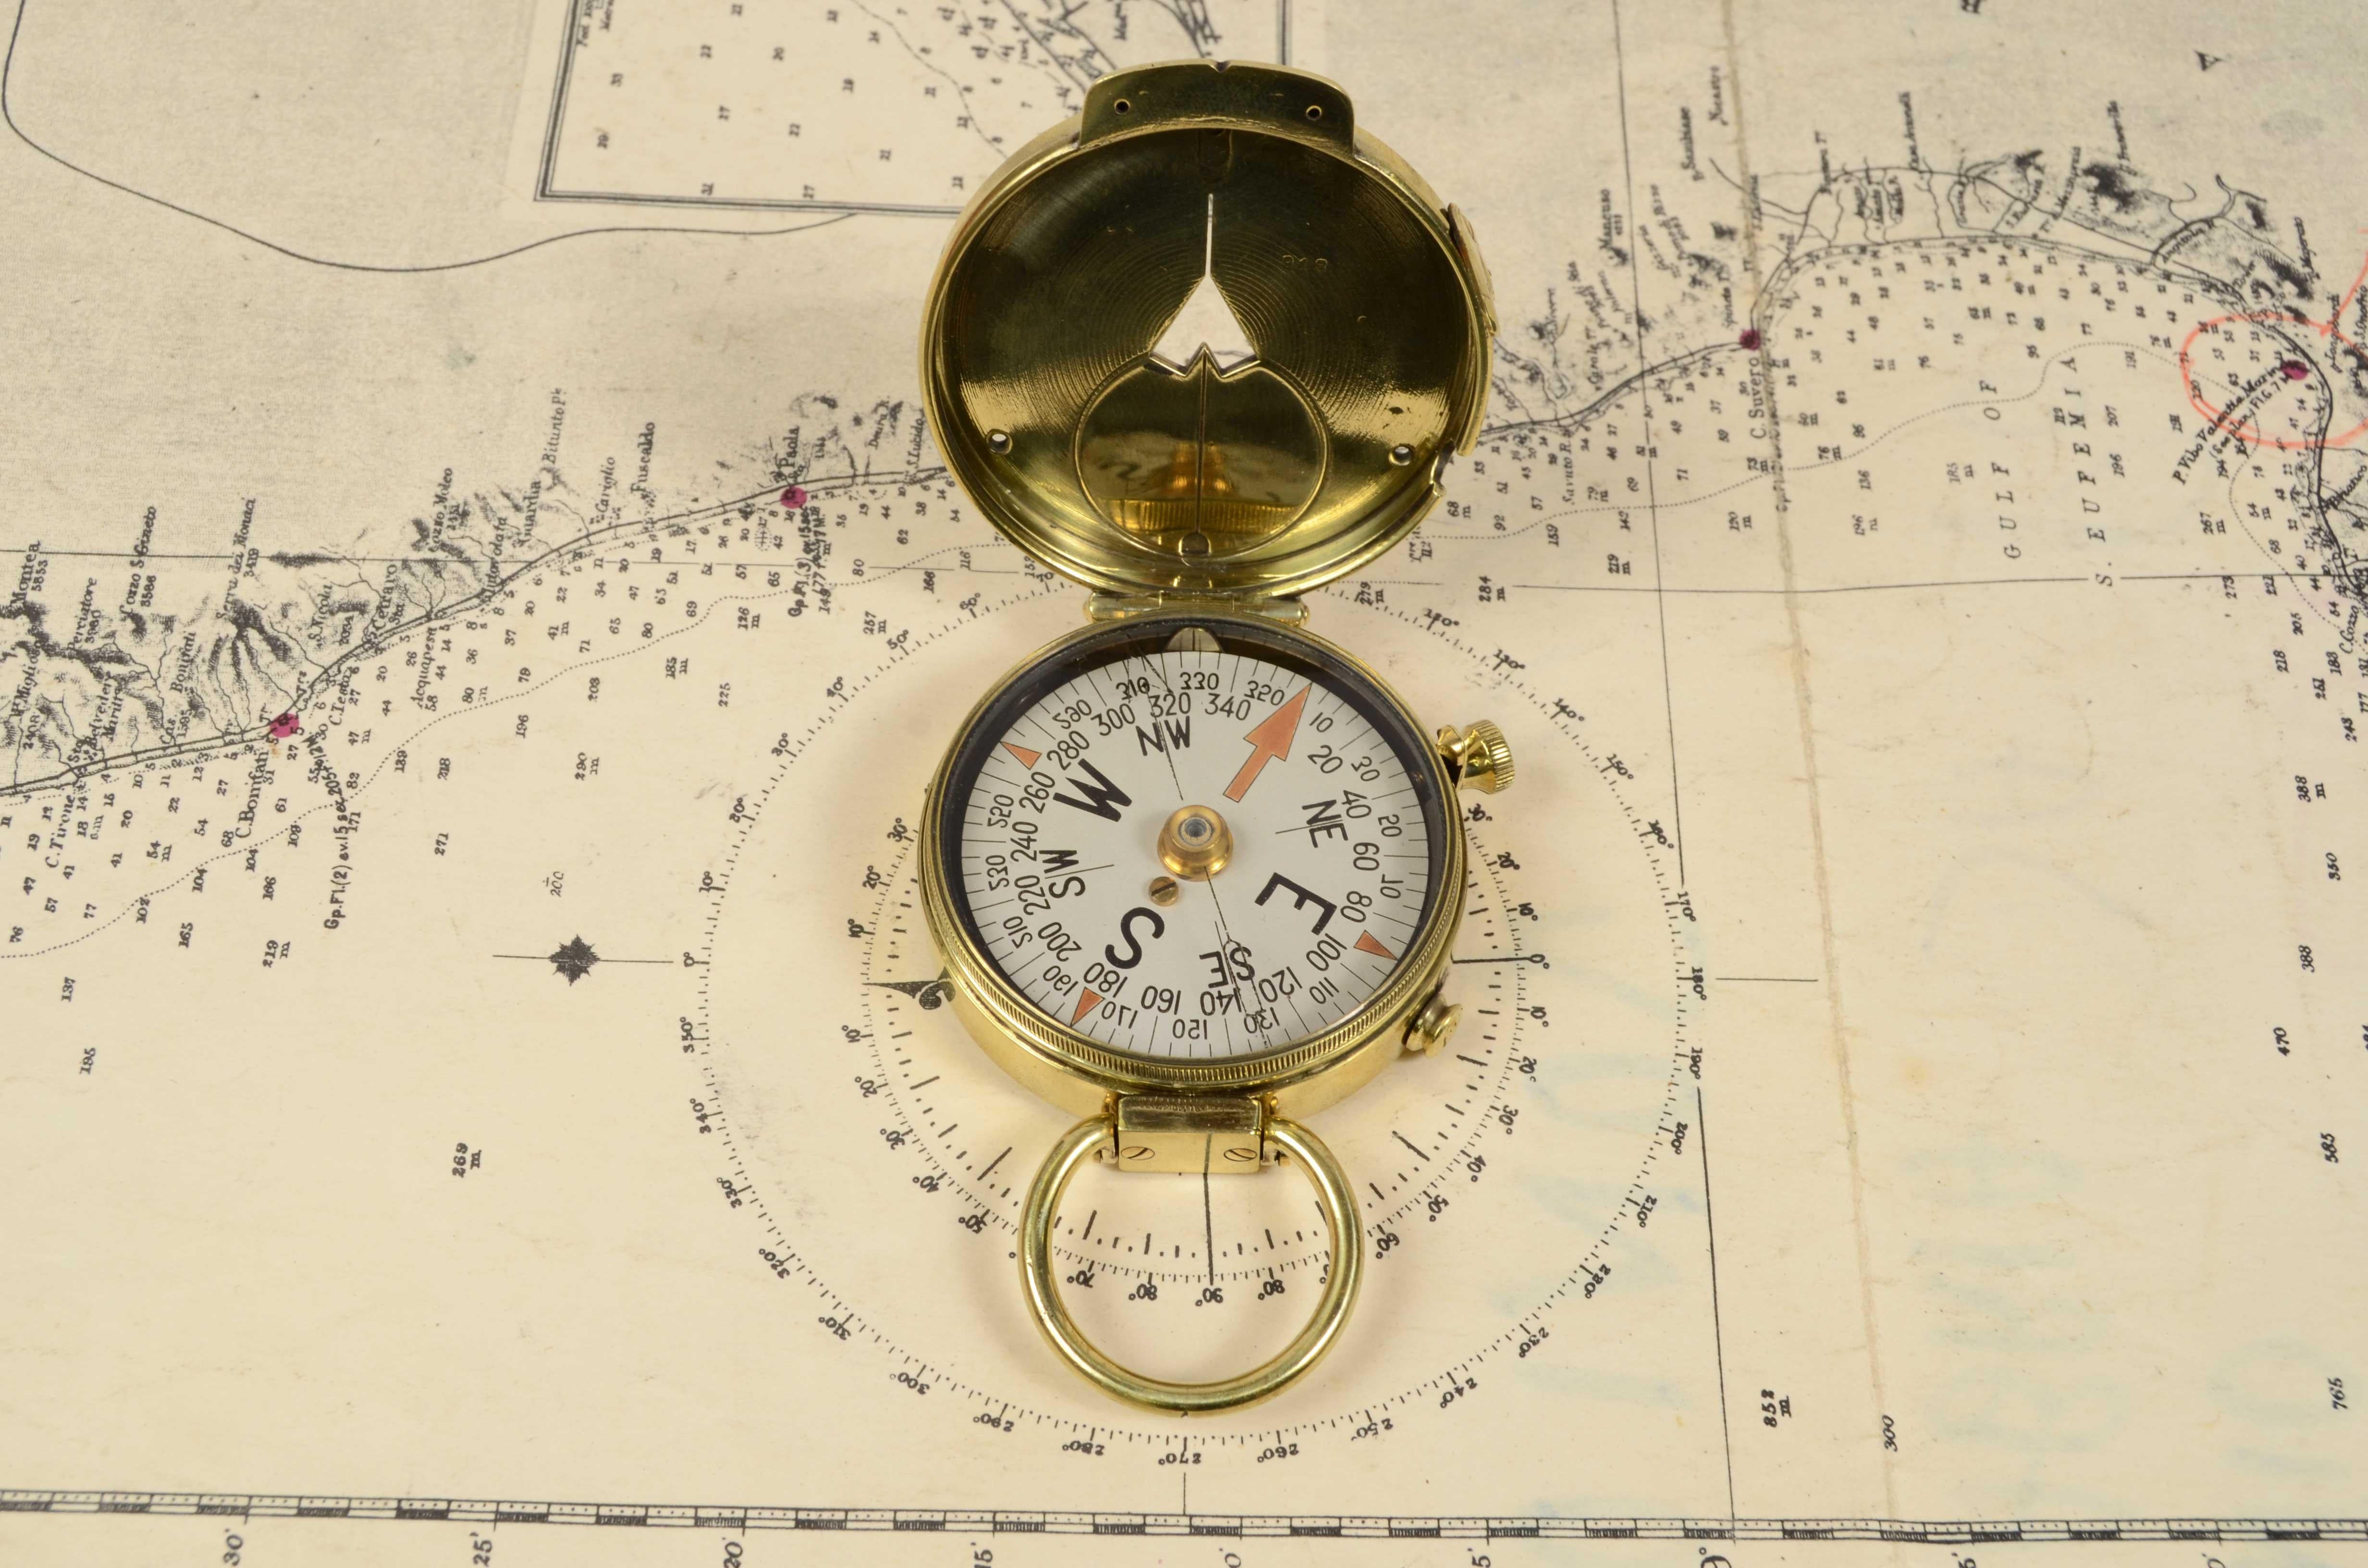 Magnetic compass for nautical detection, of brass, signed Cruchon & Emons Paris n. 918 of 1918 made for the U.S. Engineer Corps. It is a small compass, diameter 5.3 cm - 2 inches, height 1.8 cm - 0.7 inches; typically used in recreational sailing,